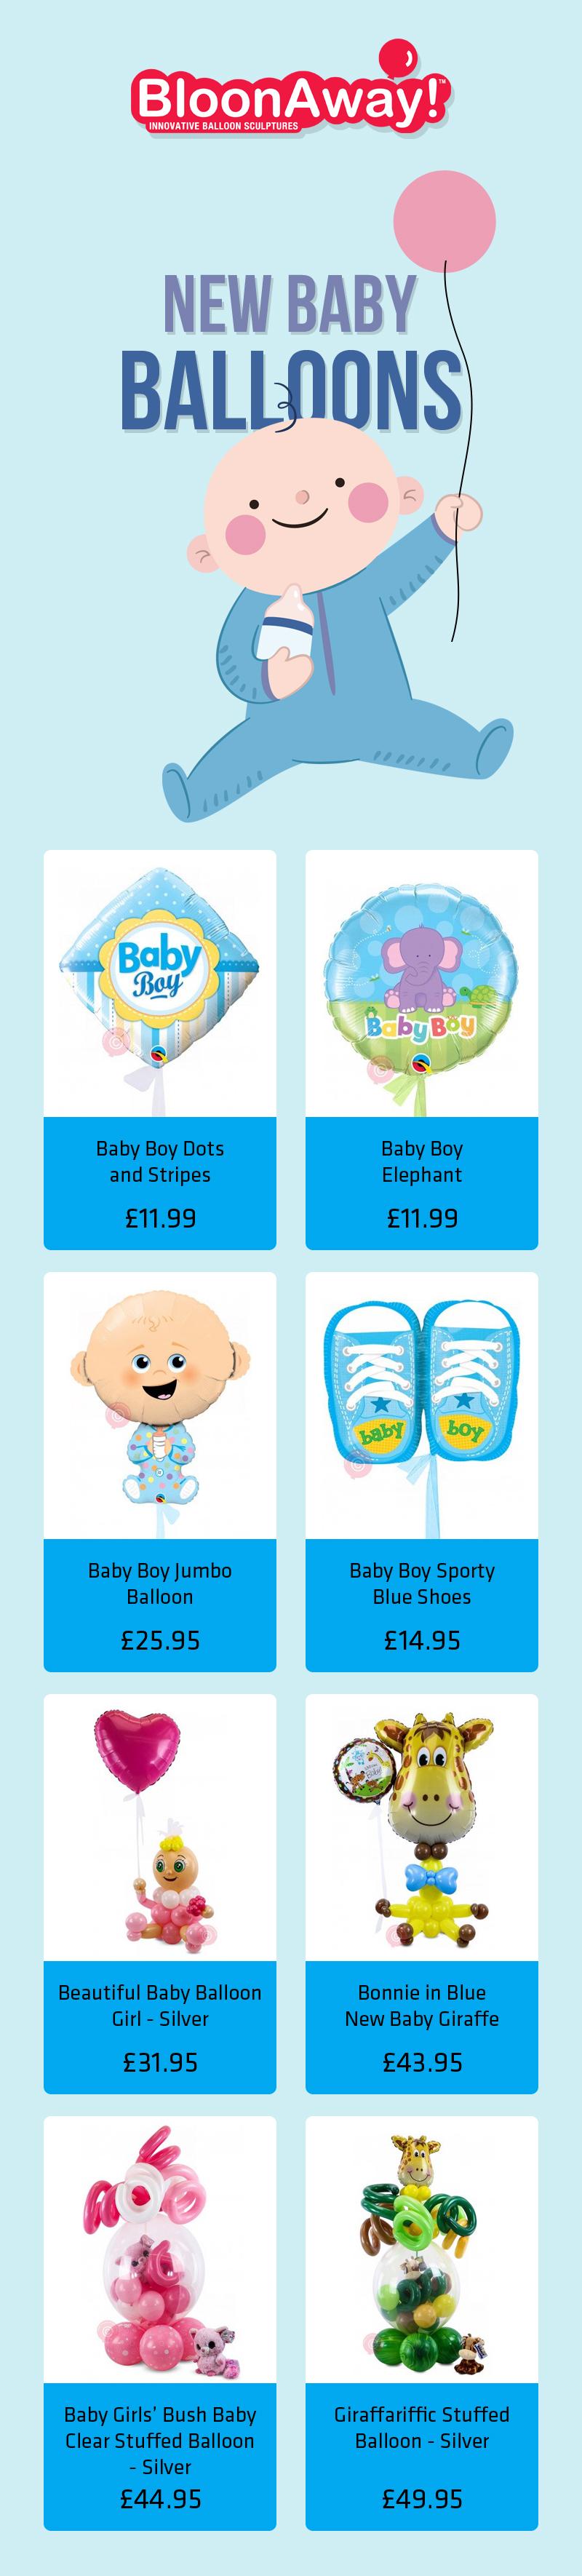 Shop High-Quality Personalised New Baby Balloons Online at BloonAway